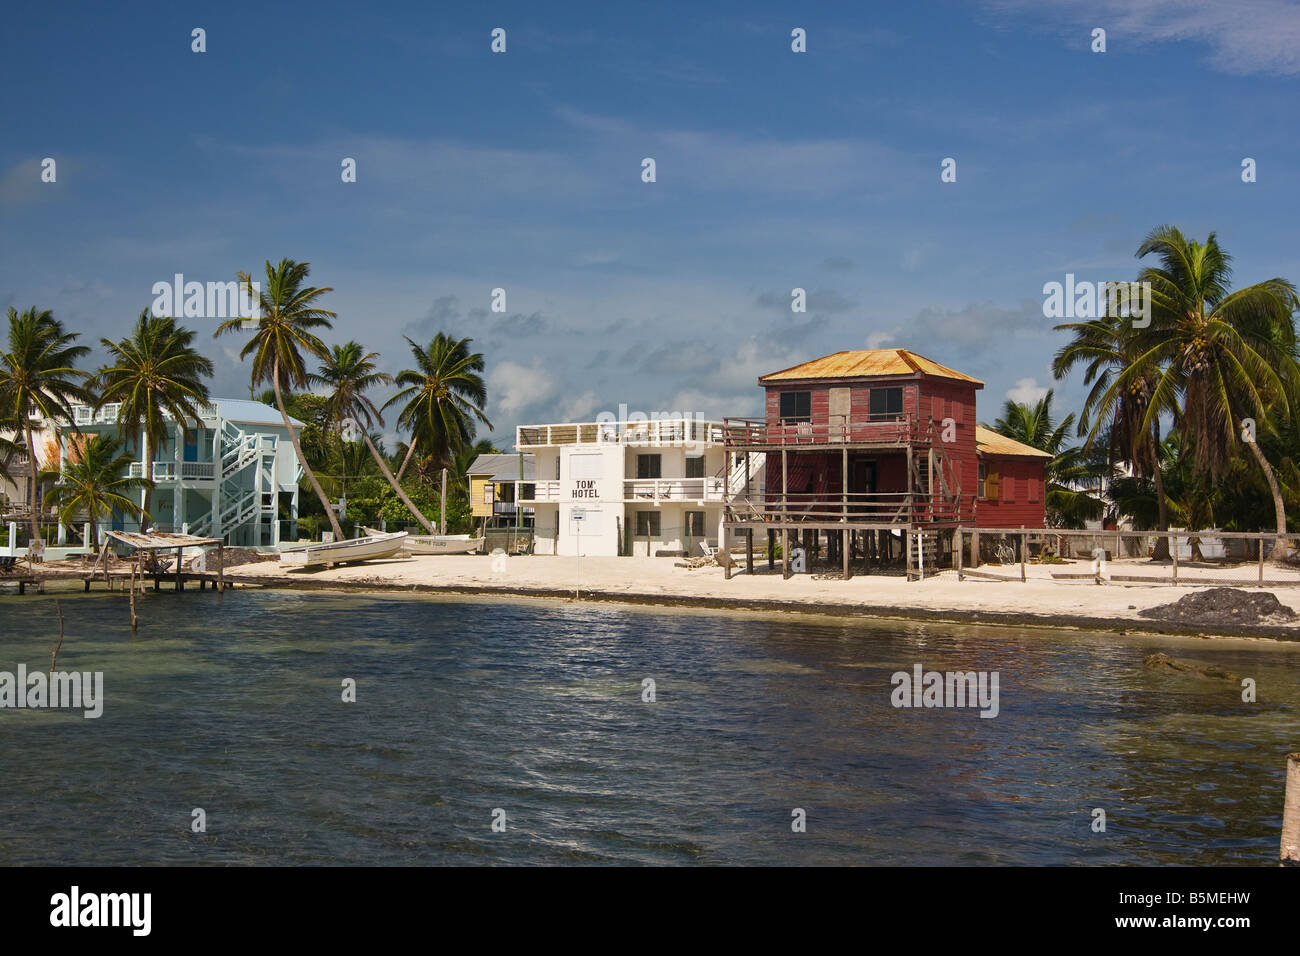 CAYE CAULKER BELIZE - Hotels and homes on beach Stock Photo